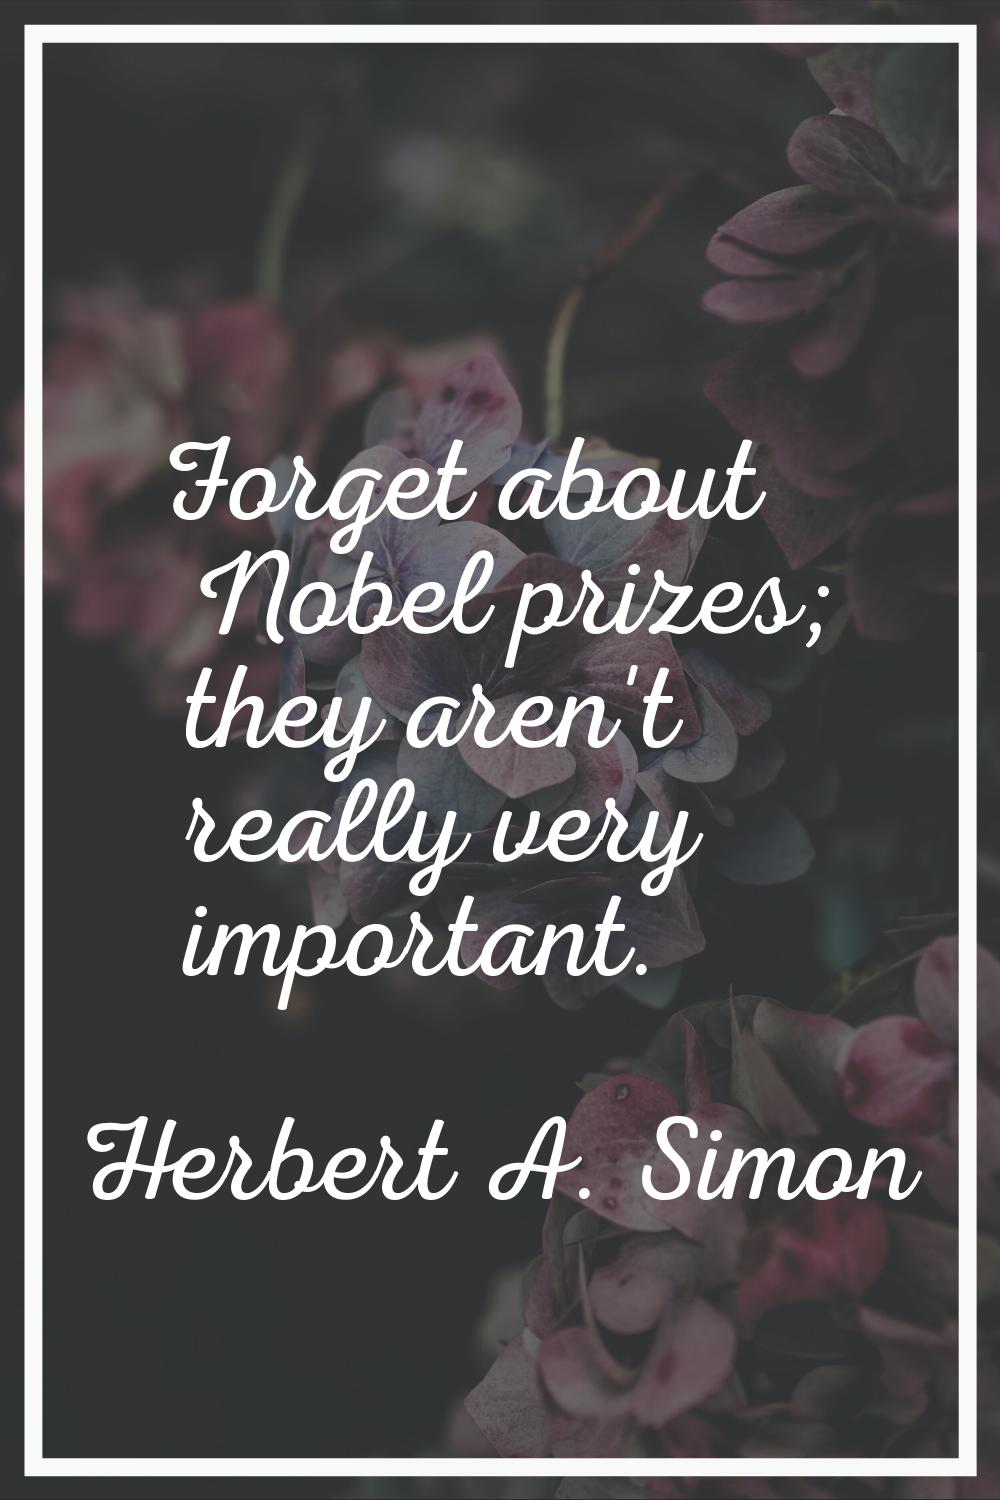 Forget about Nobel prizes; they aren't really very important.